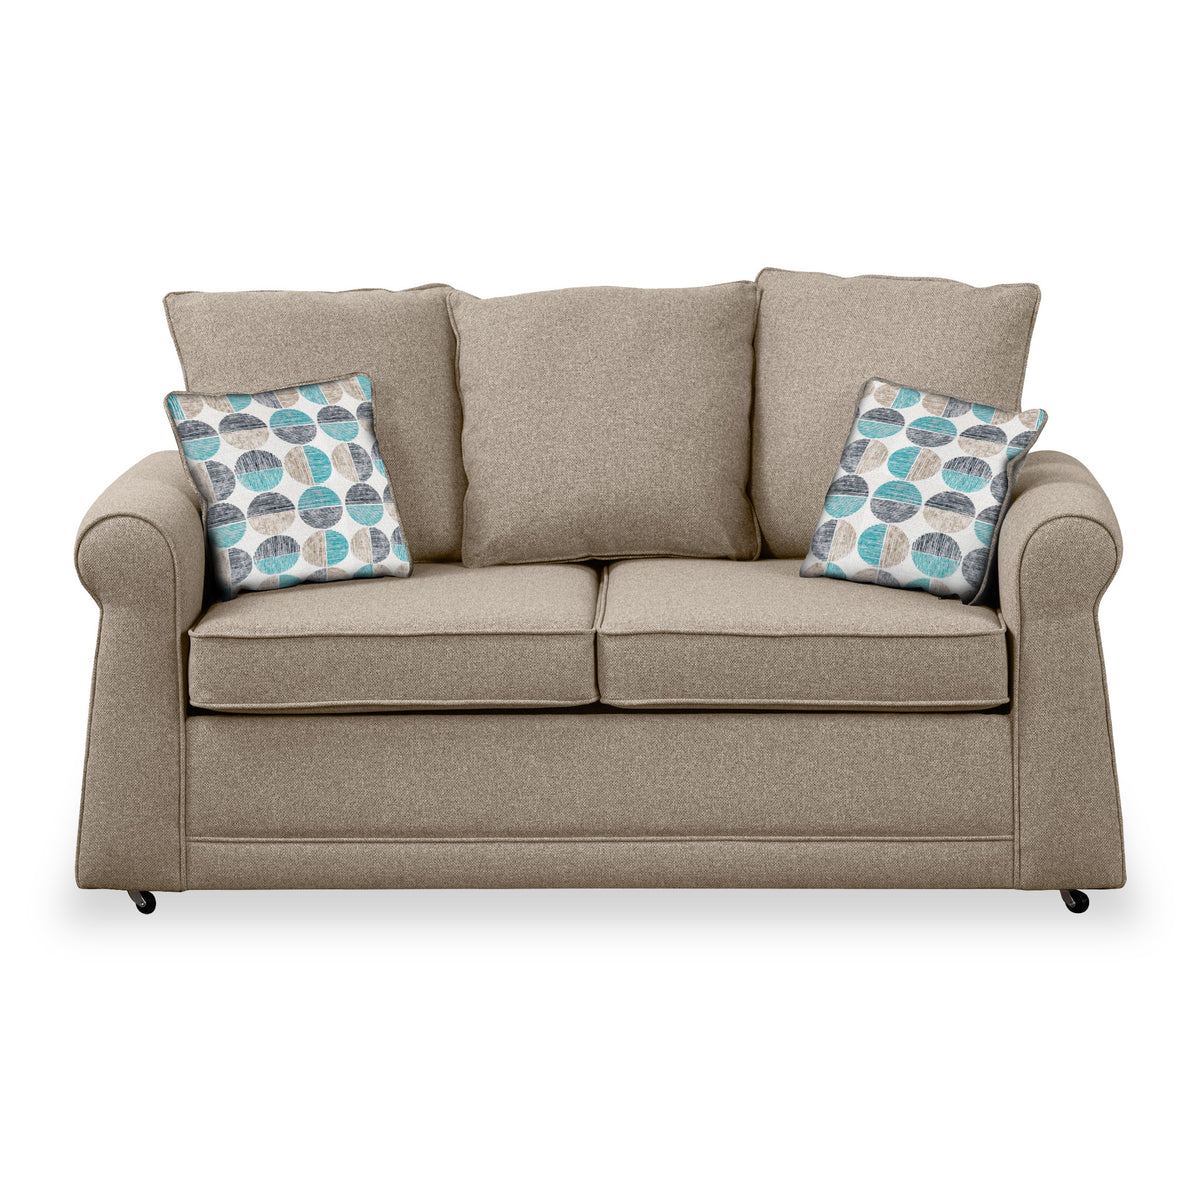 Broughton Oatmeal Faux Linen 2 Seater Sofabed with Duck Egg Scatter Cushions from Roseland Furniture